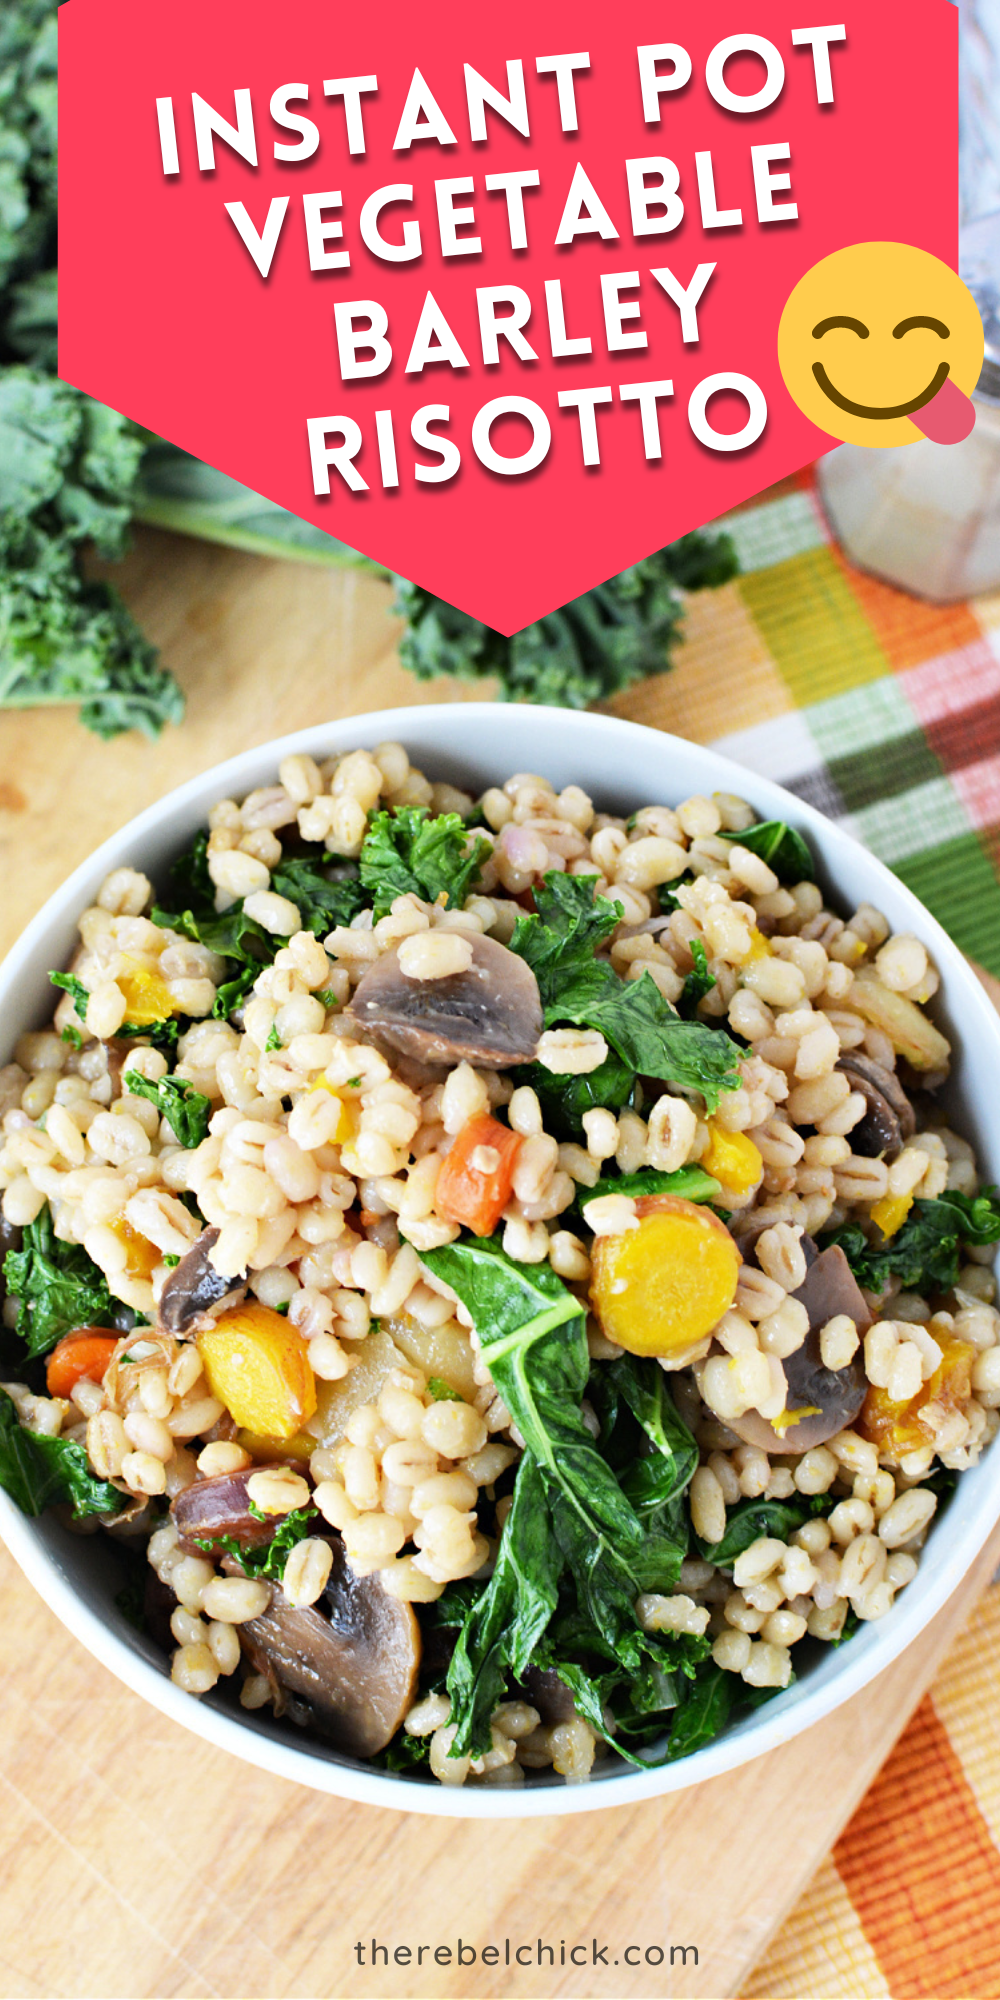 Instant Pot Vegetable Barley Risotto Recipe for Meatless Monday